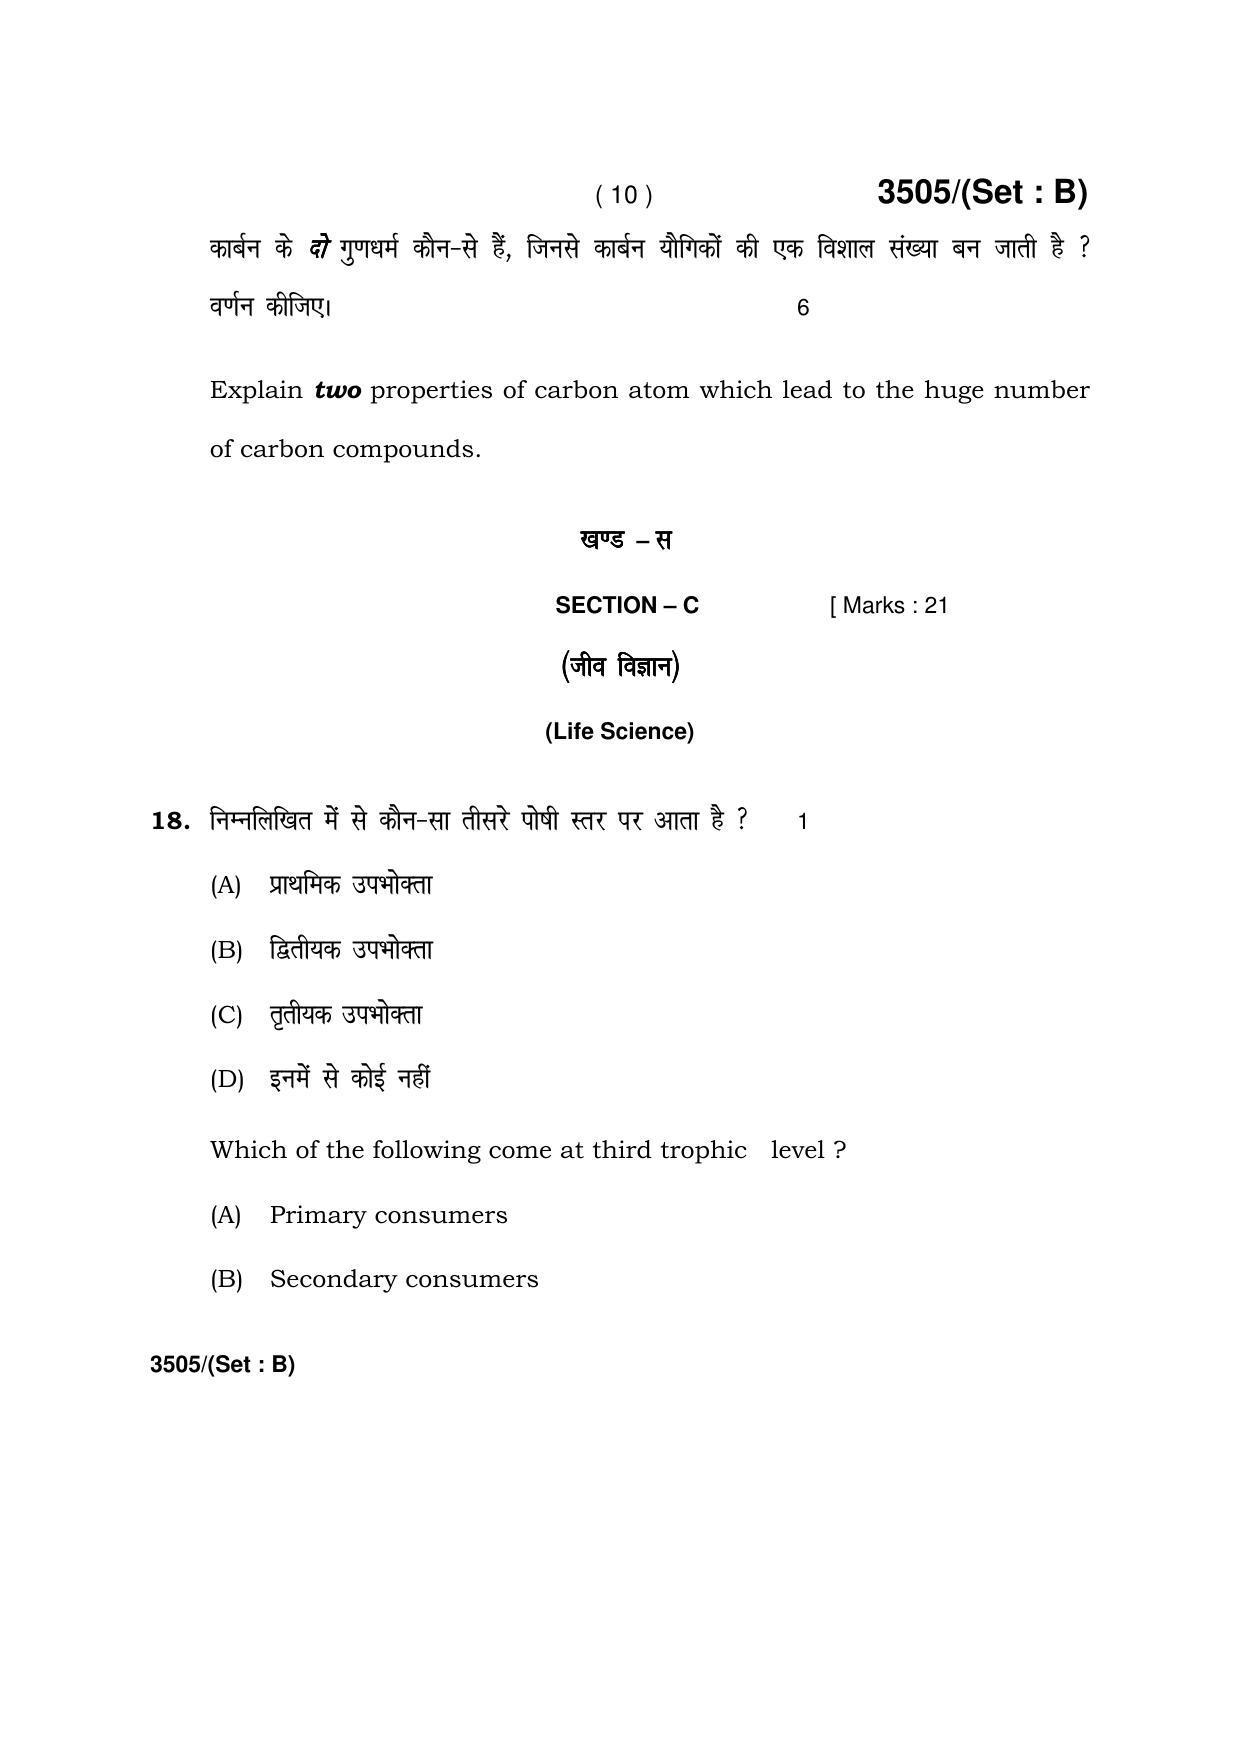 Haryana Board HBSE Class 10 Science -B 2018 Question Paper - Page 10